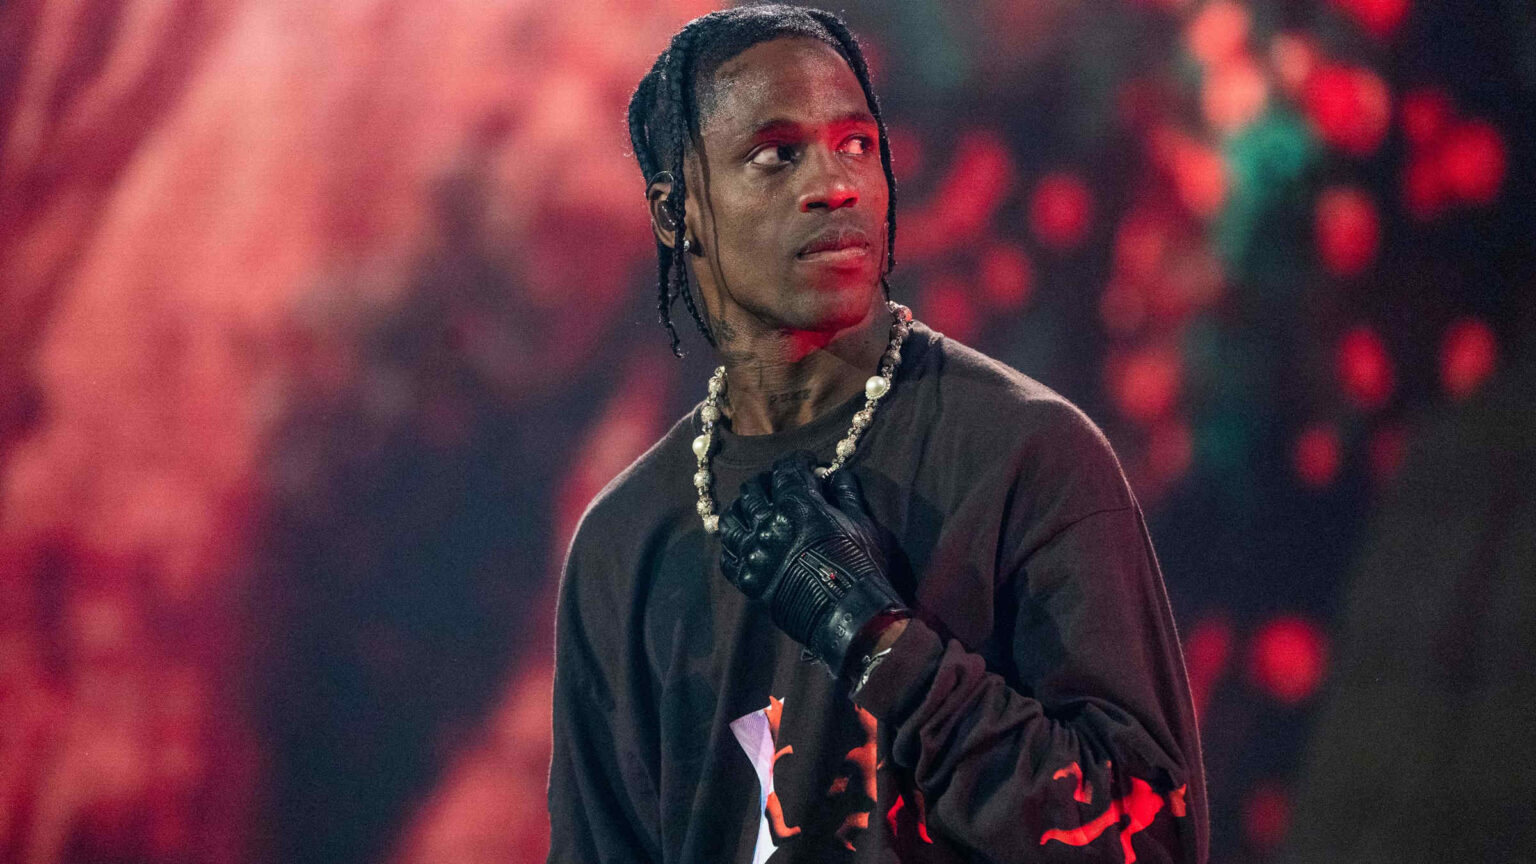 In the tragic aftermath of Astroworld, fans are now refusing to listen to music by Travis Scott. Has the popular rager finally been knocked for the night?